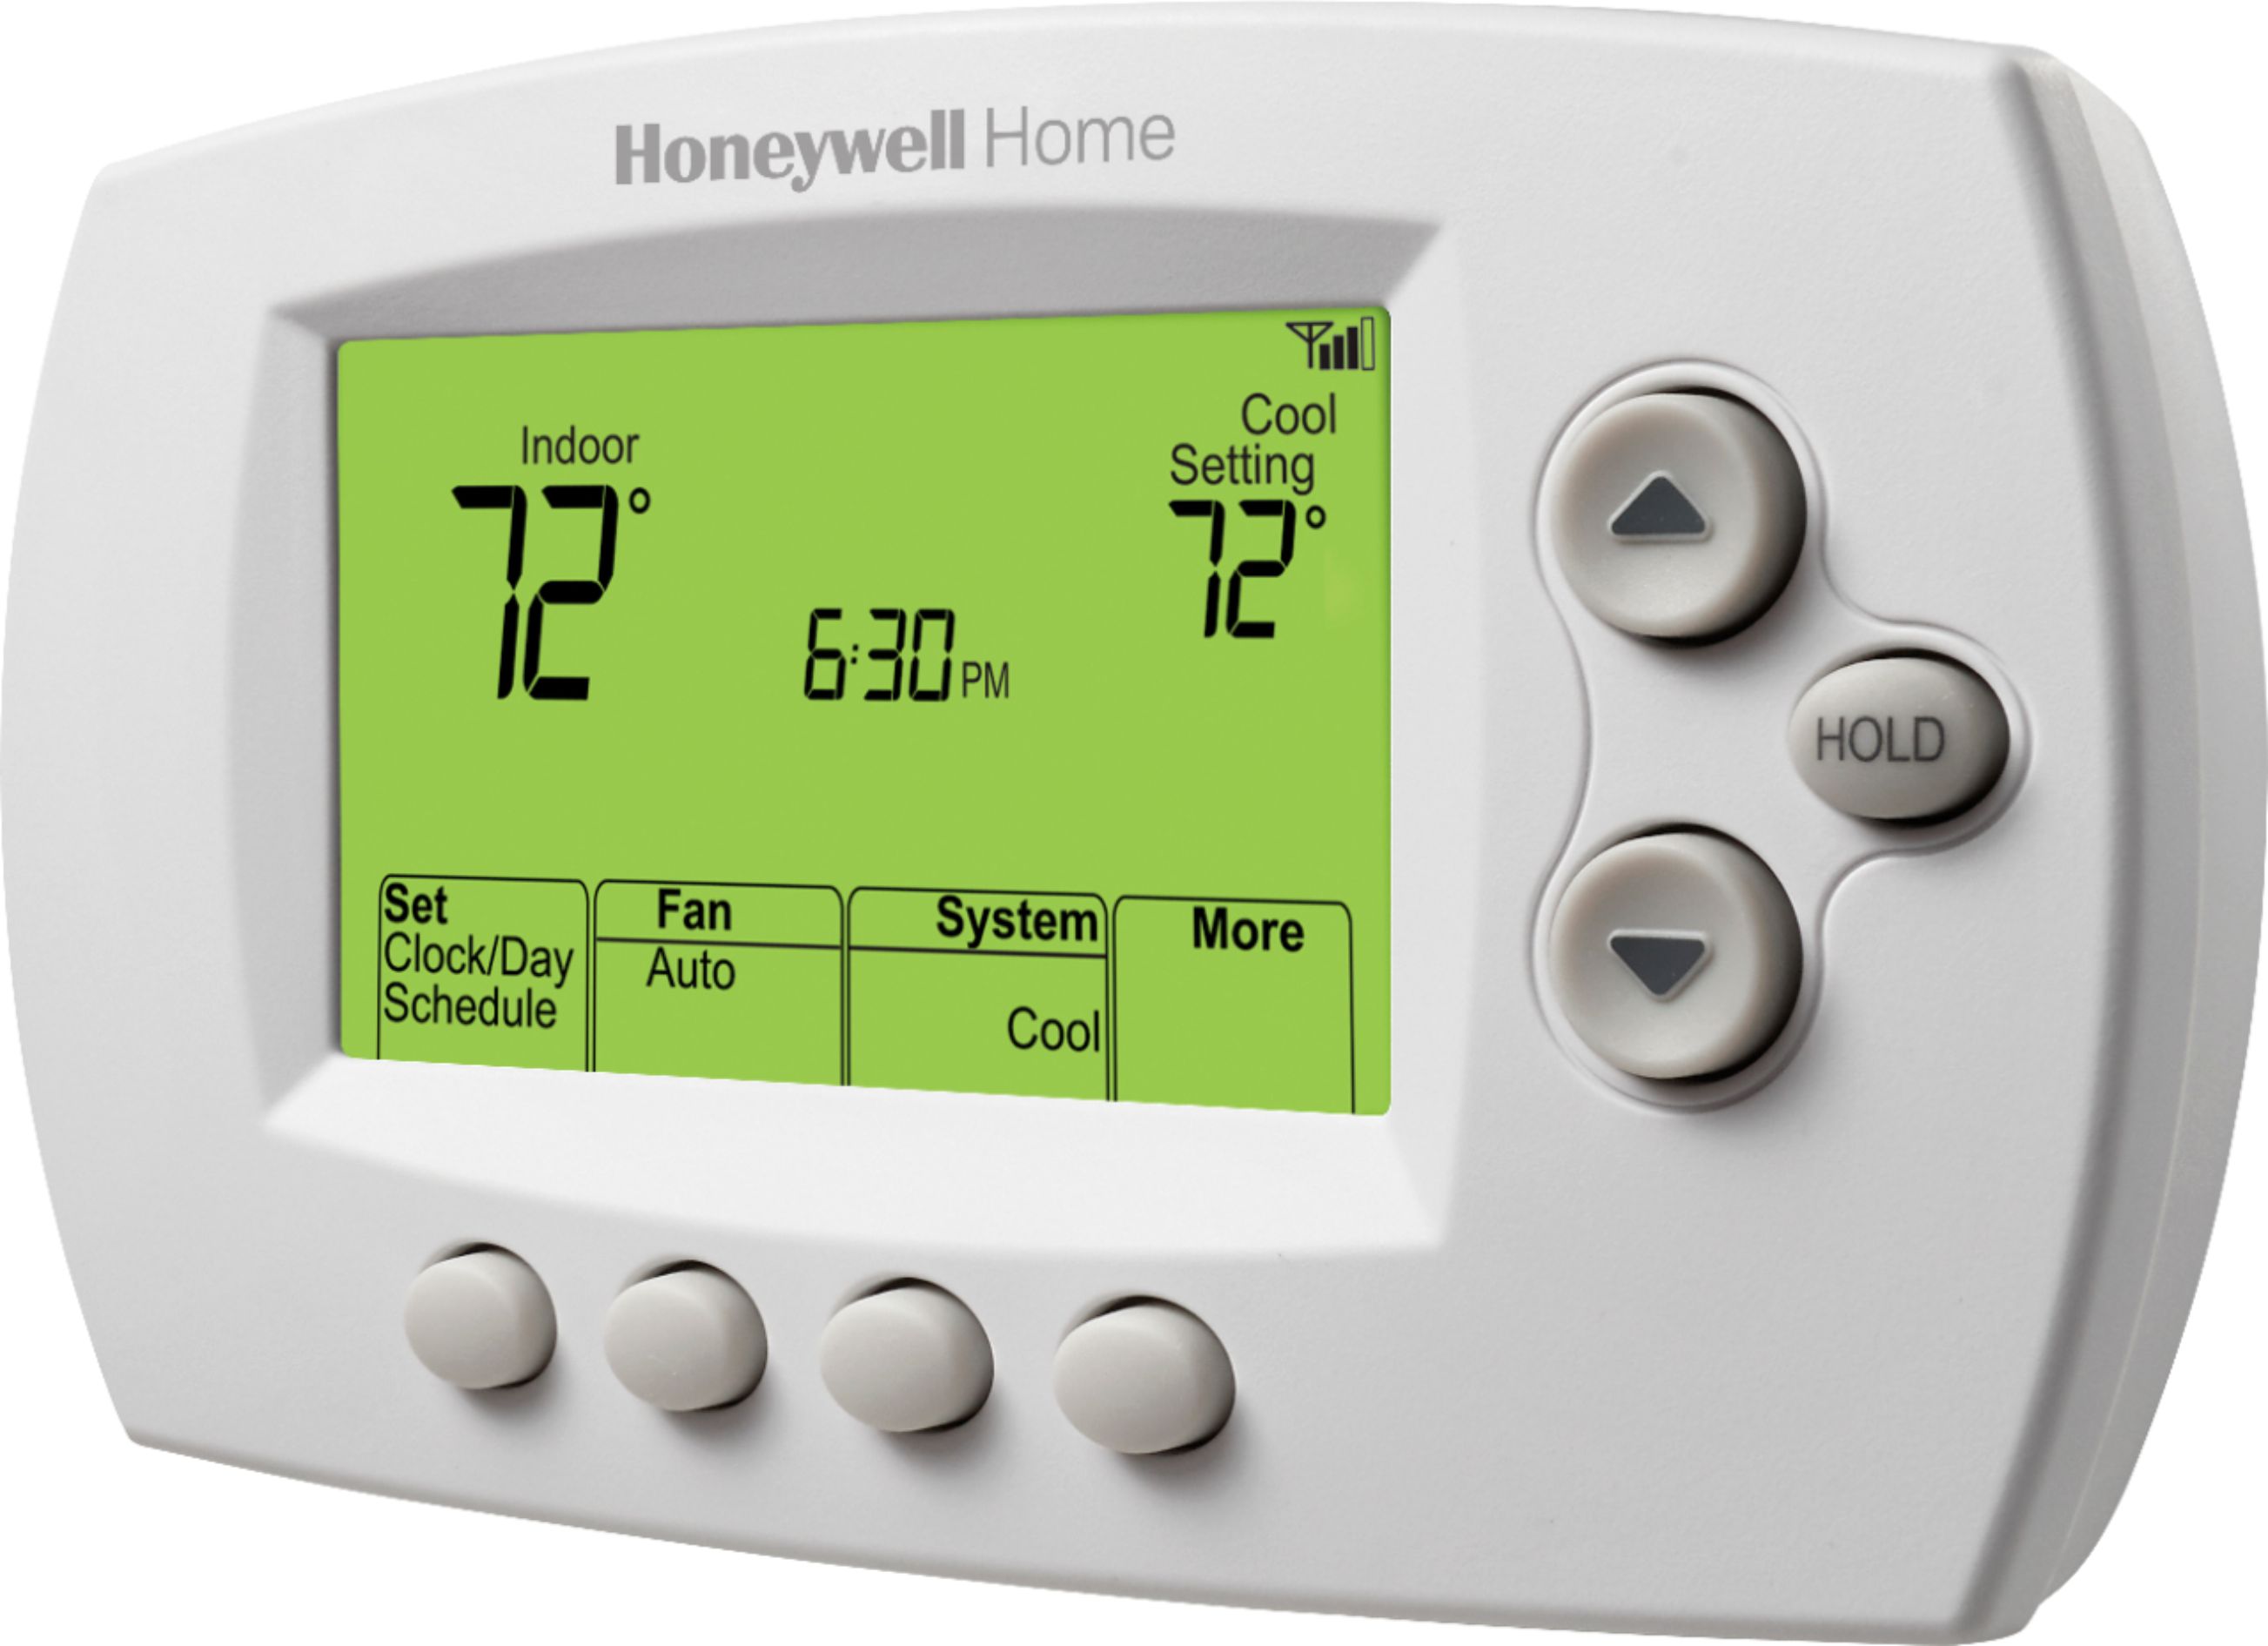 Why Does My Honeywell Smart Thermostat Display The Wrong Temperature